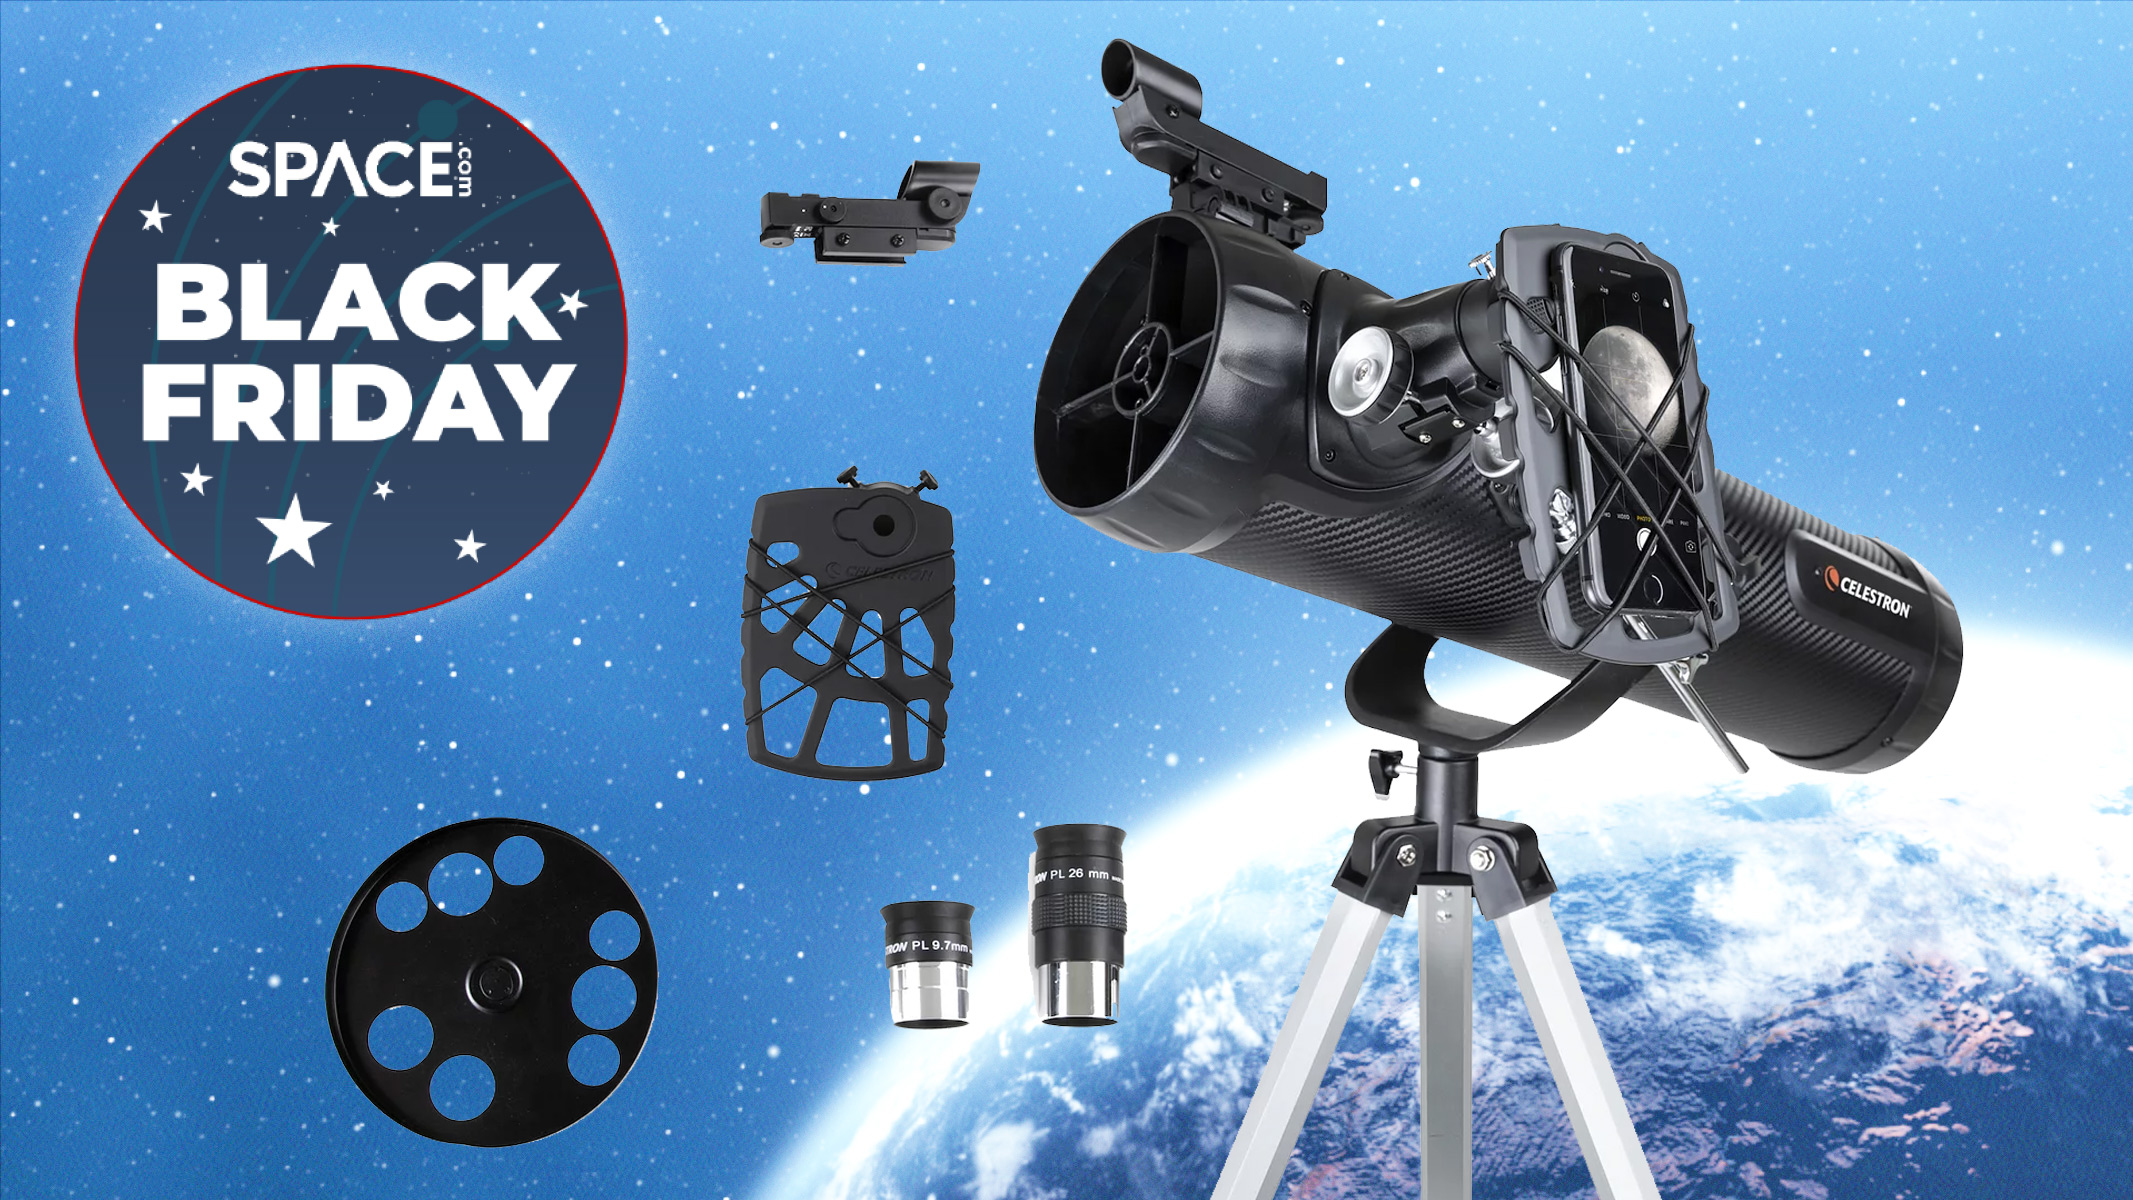 Celestron astromaster 114az-sr and accessories viewed in front of a space photo of the earth and stars with a black friday deal logo